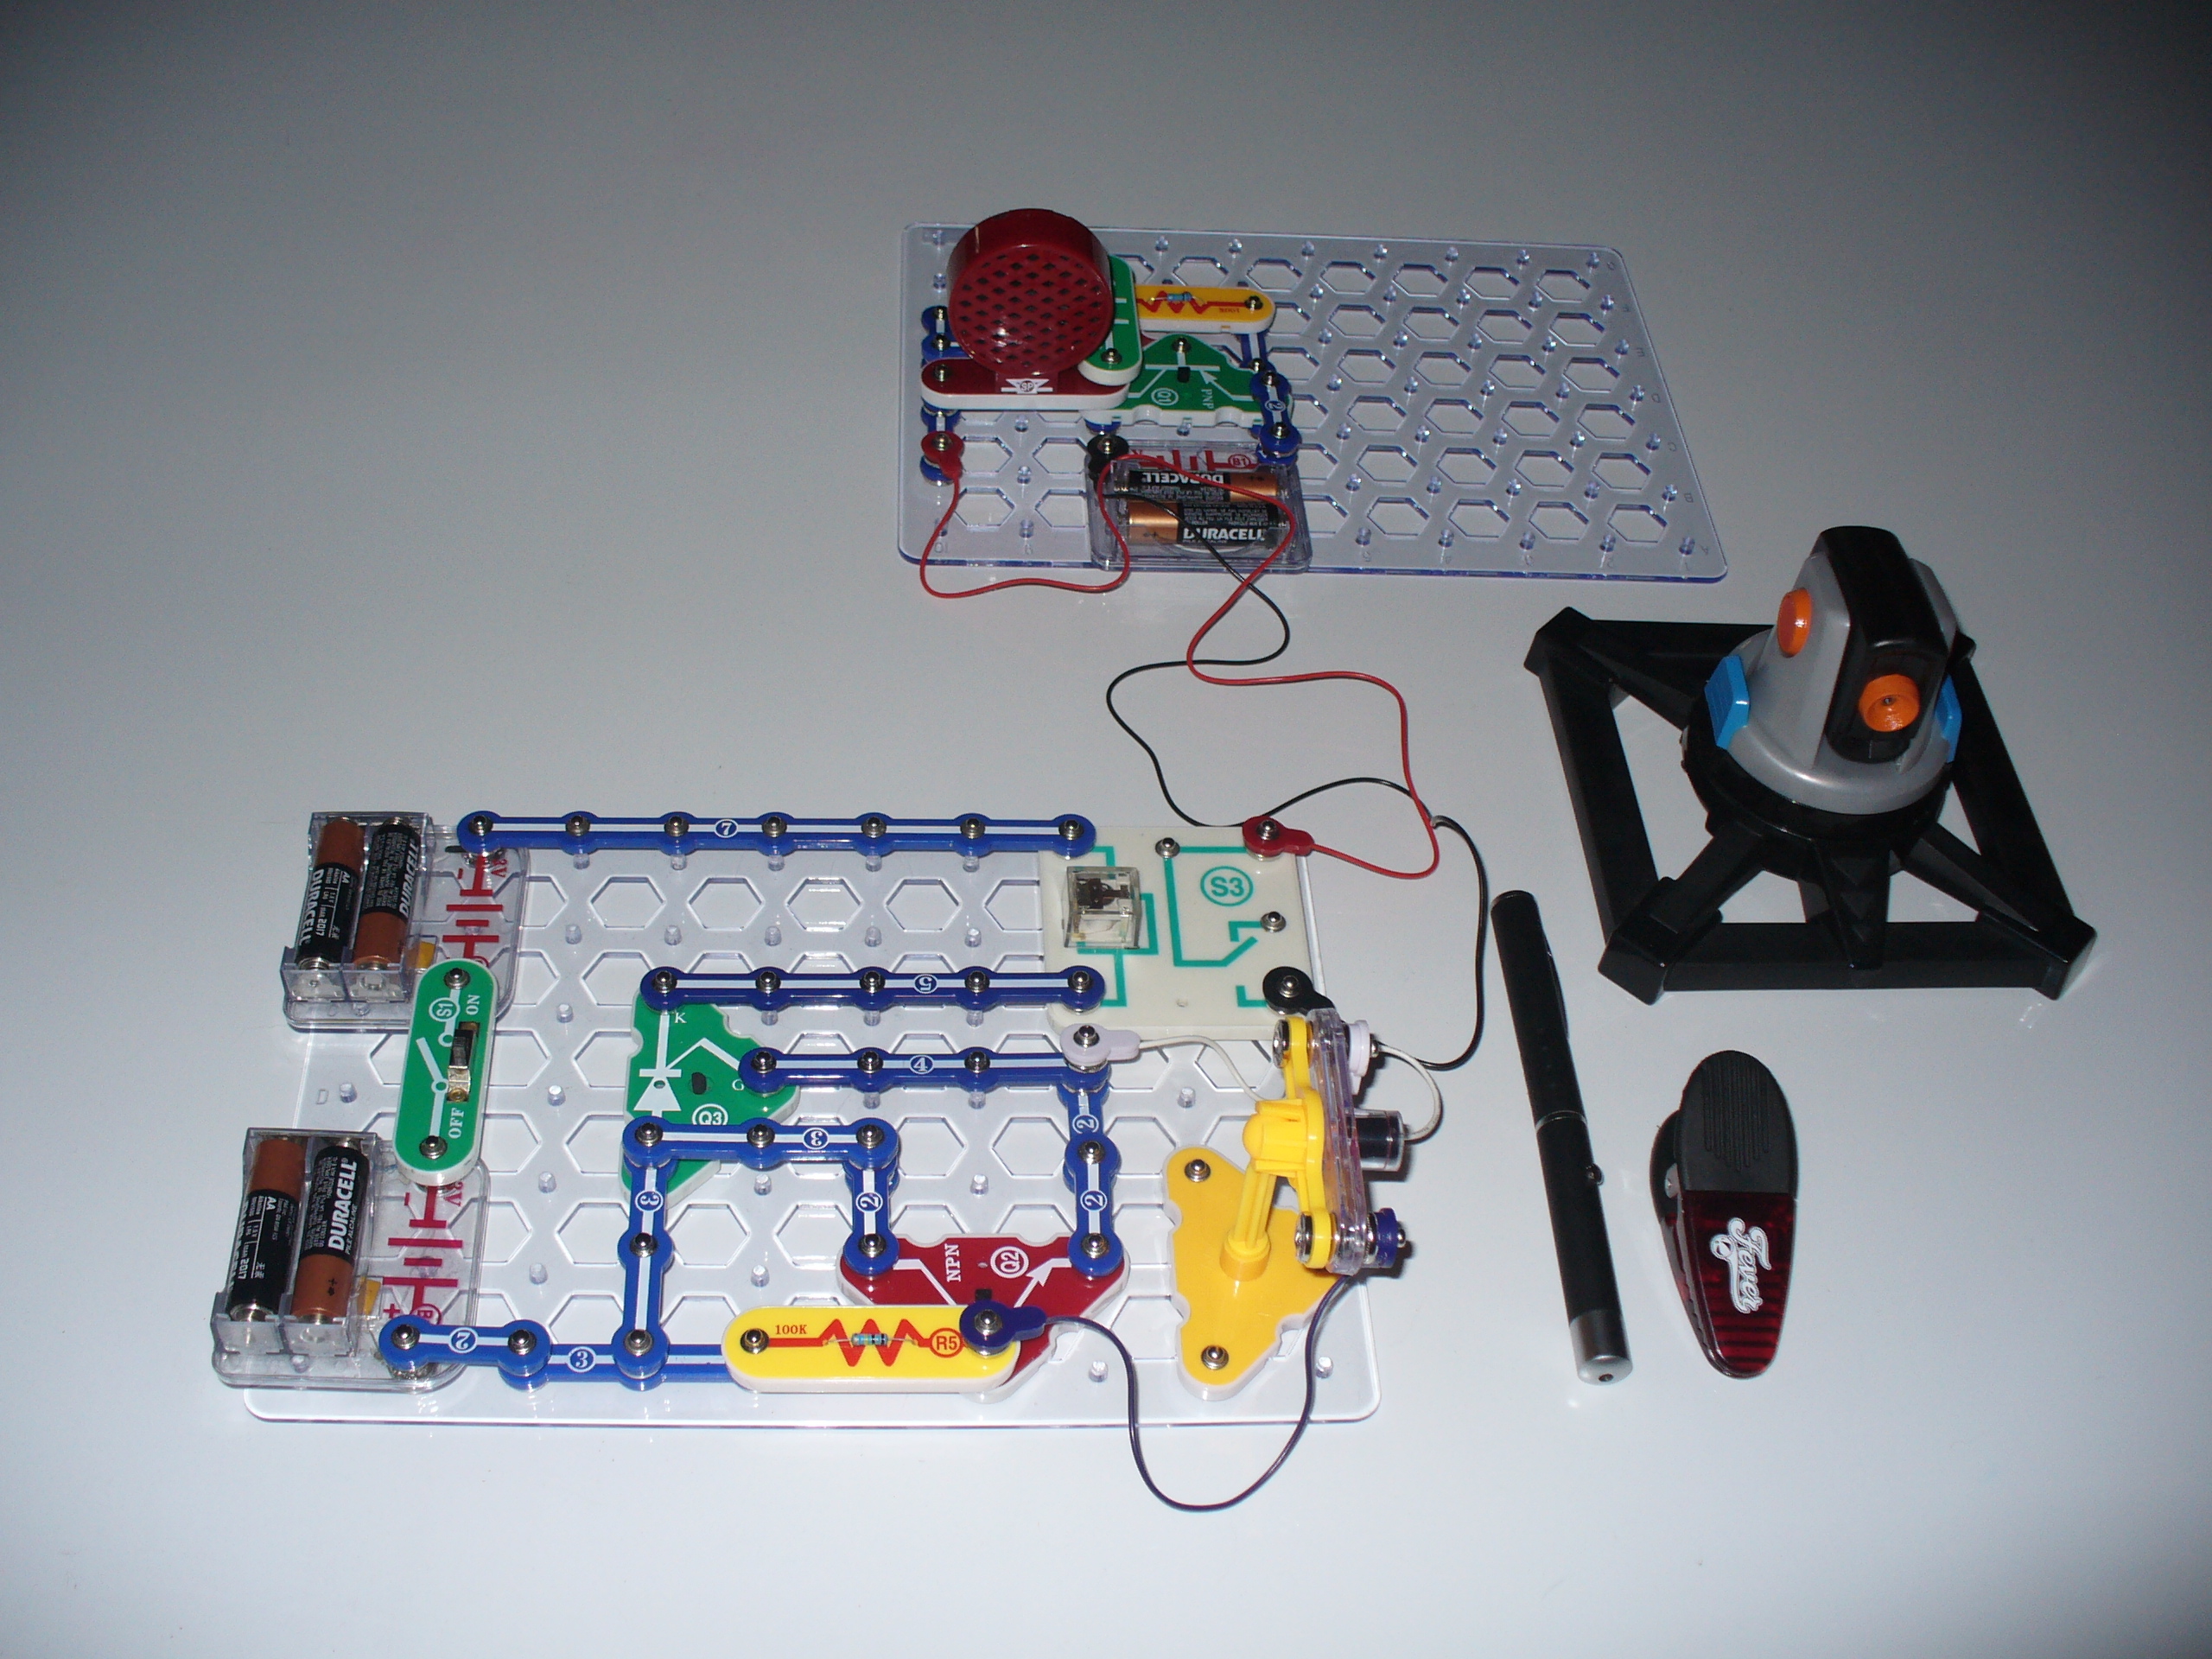 Laser Tripwire and Alarm Using Snap Circuits - Make